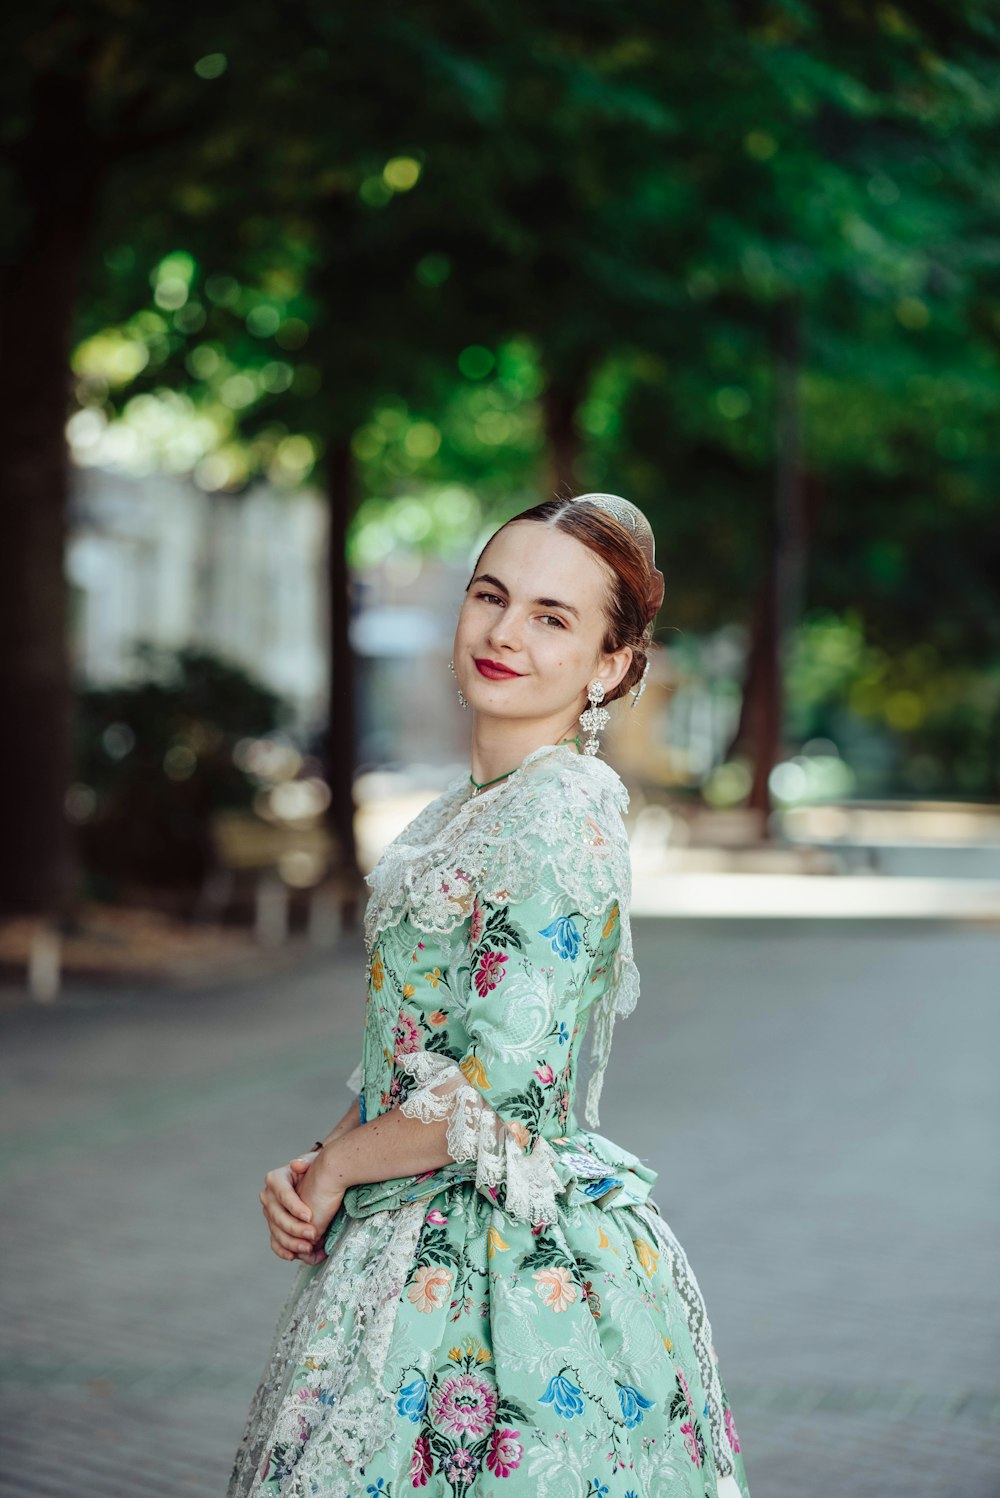 a woman in a floral dress poses for a picture